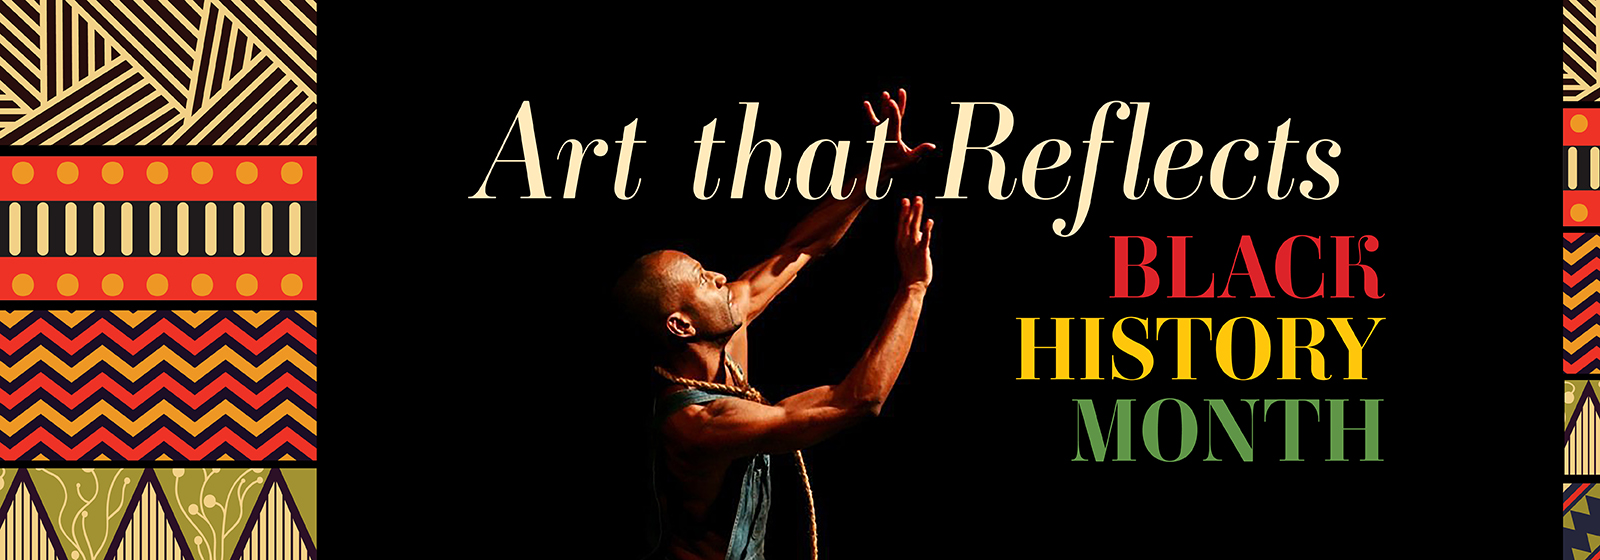 Arts That Reflect: Black History Month